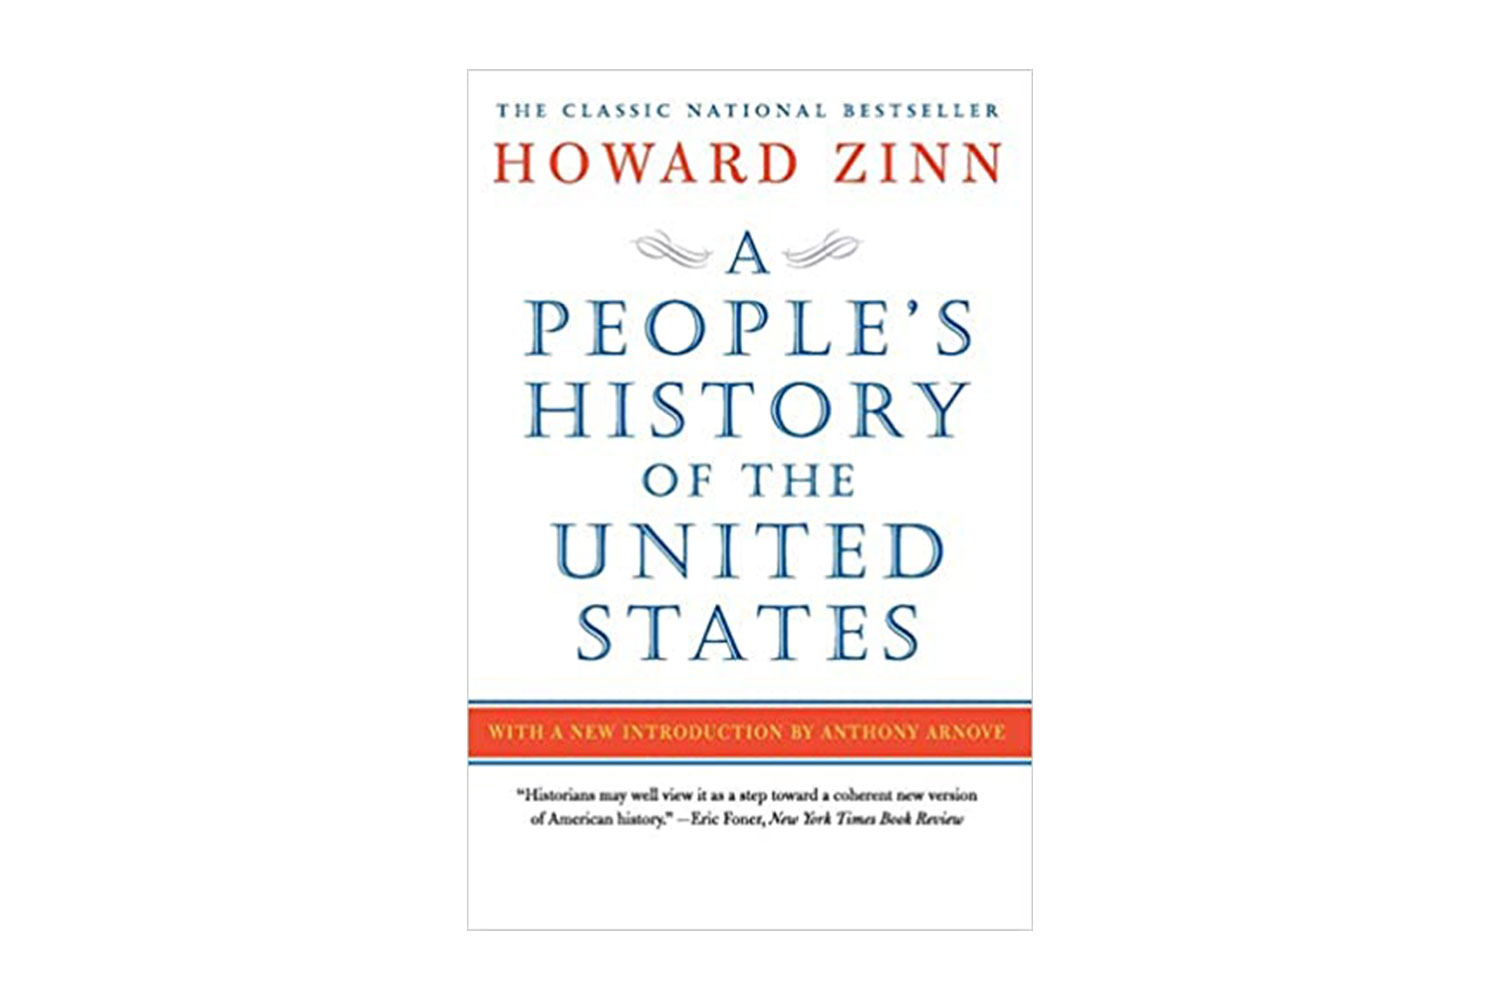 'A People's History of the United States' by Howard Zinn